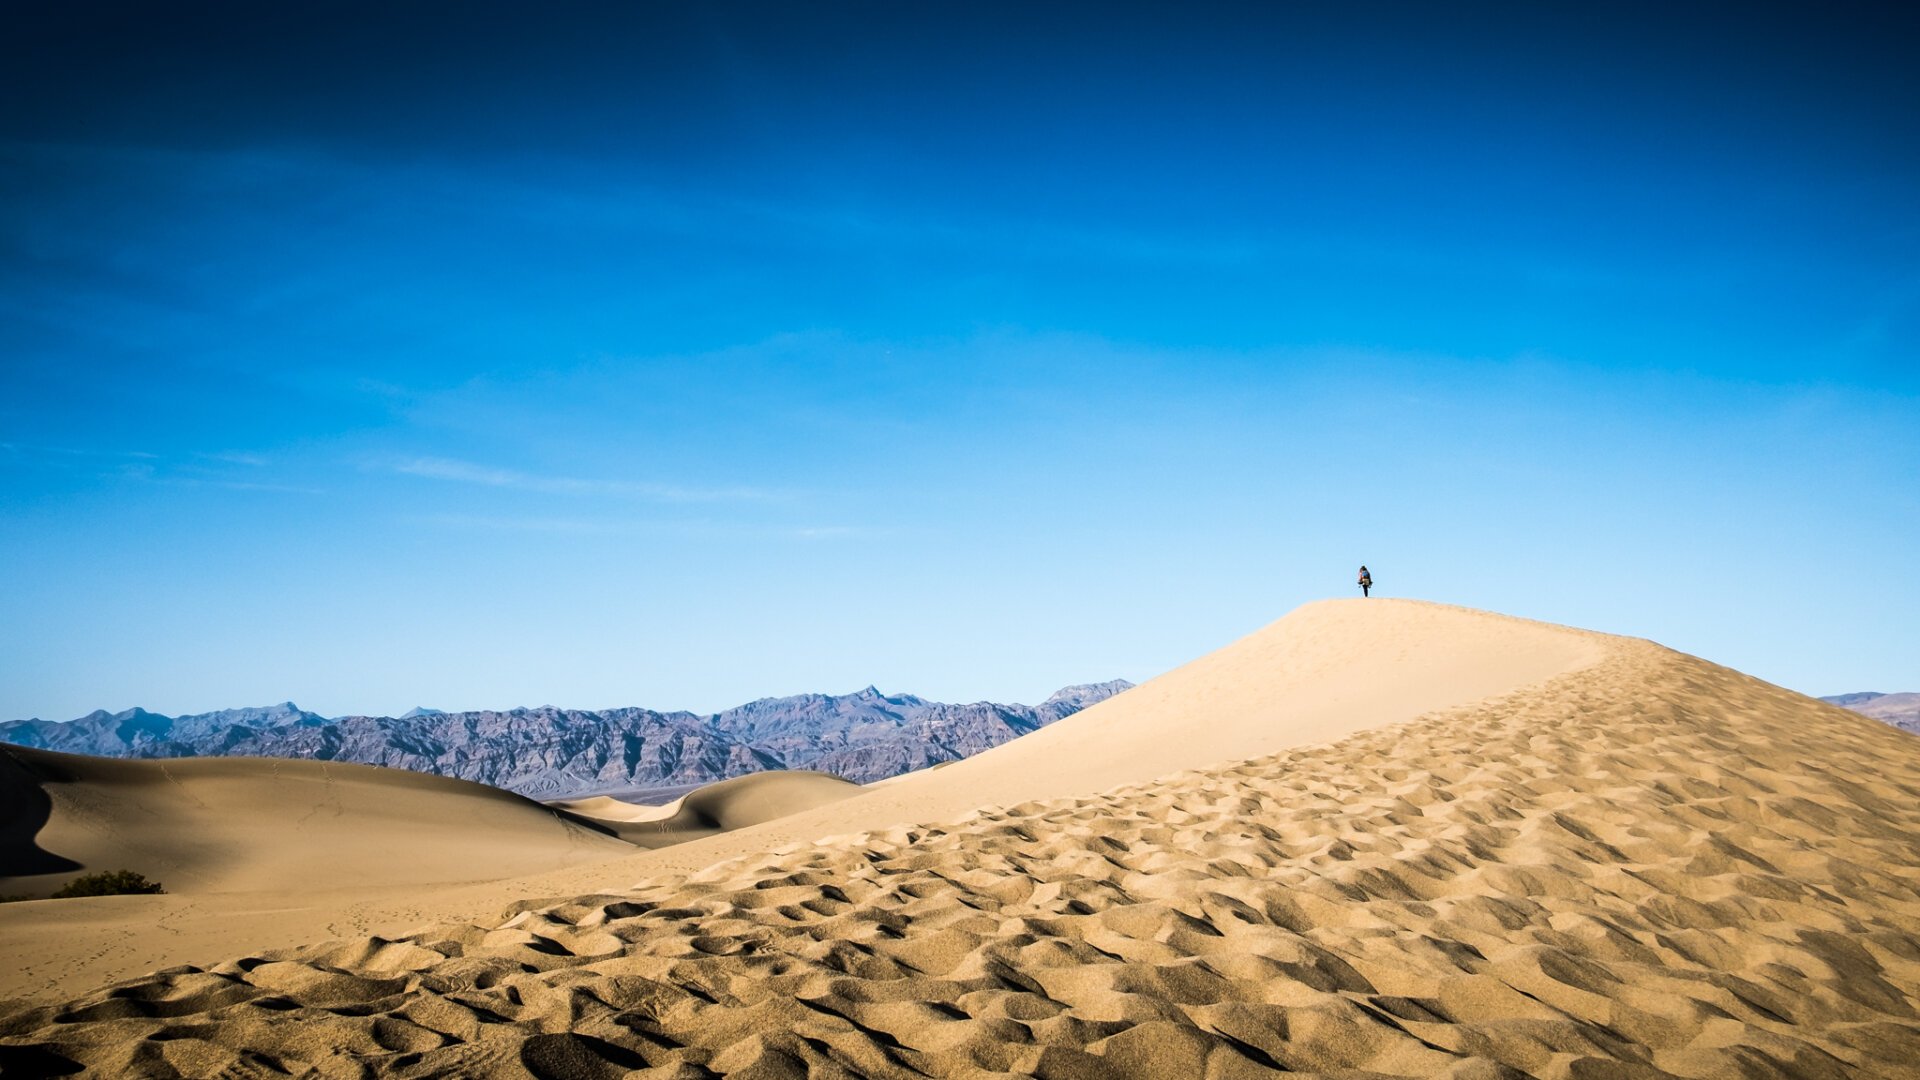 Death Valley's Mesquite Flat Sand Dunes can get really, really hot as one poor Belgian man learned.